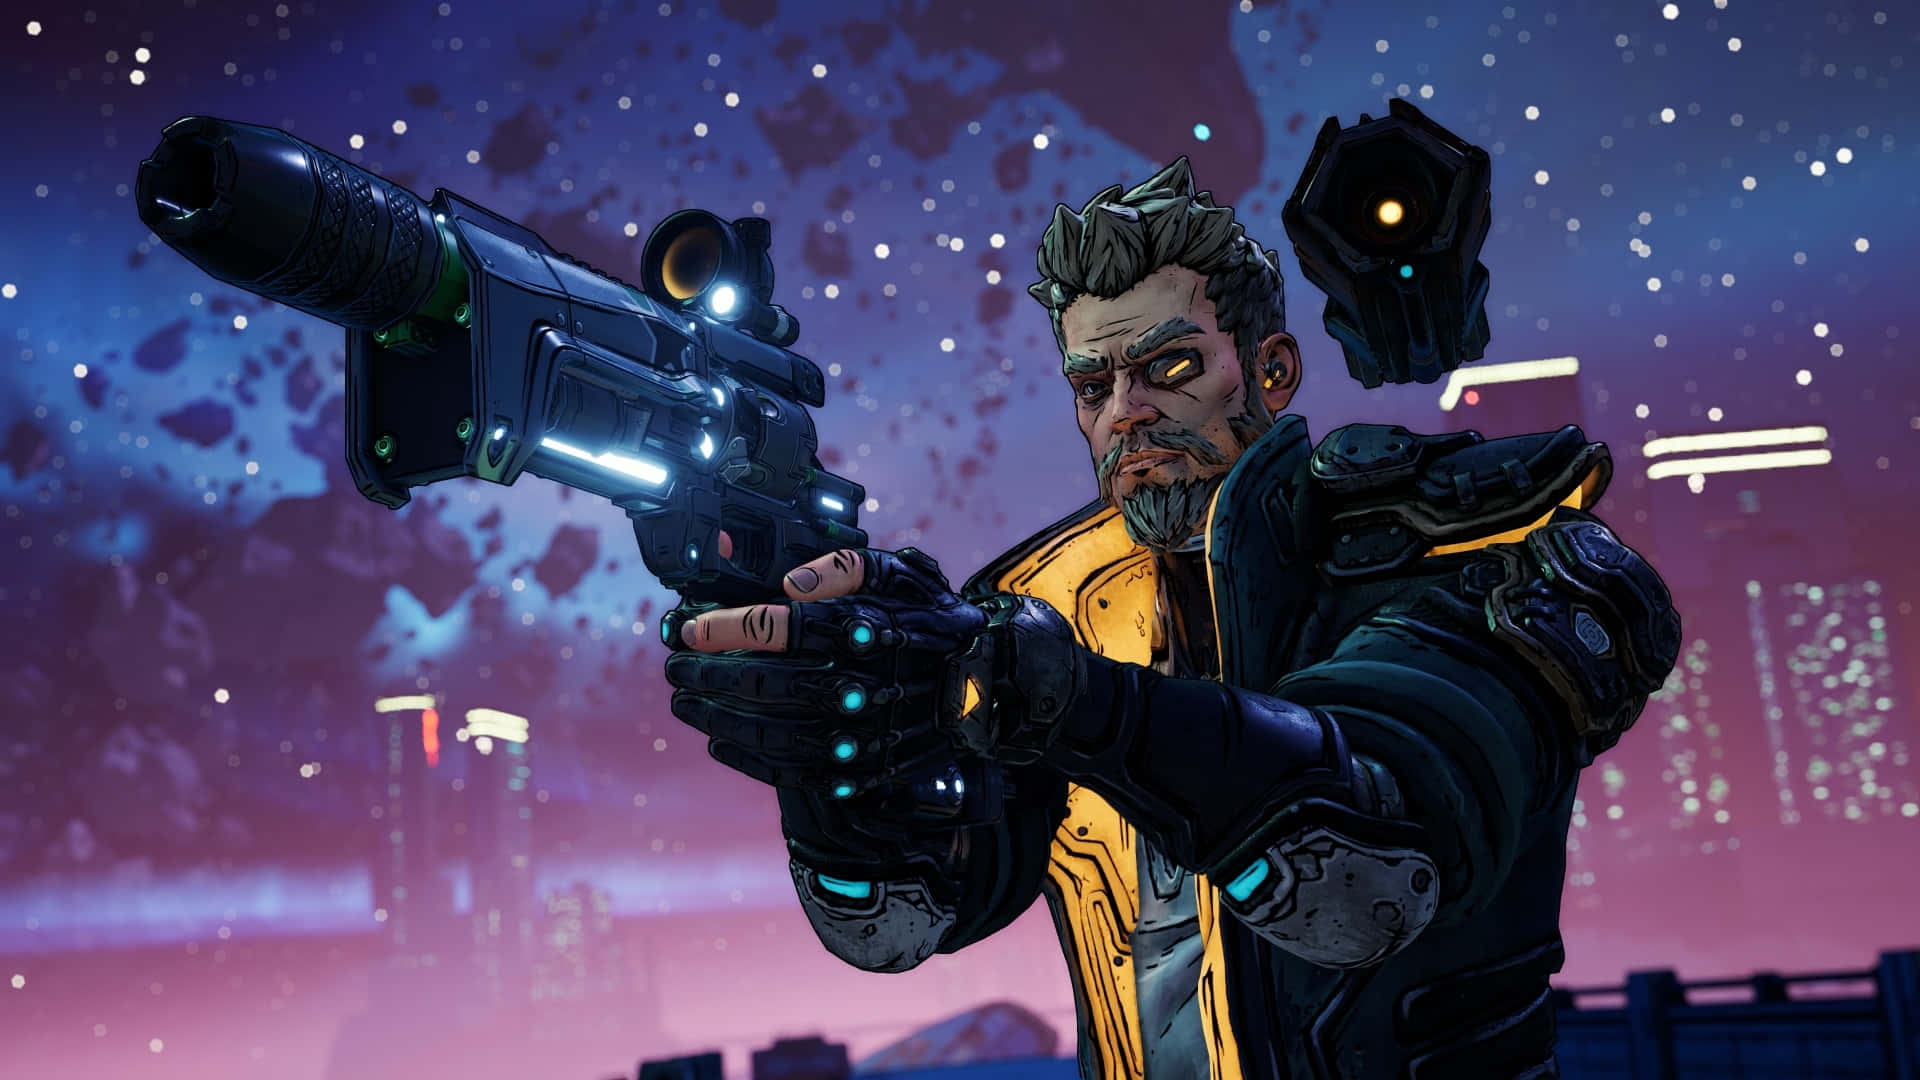 Explore the Fantastical, Dangerous Worlds of Borderlands 3 in Incredible HD